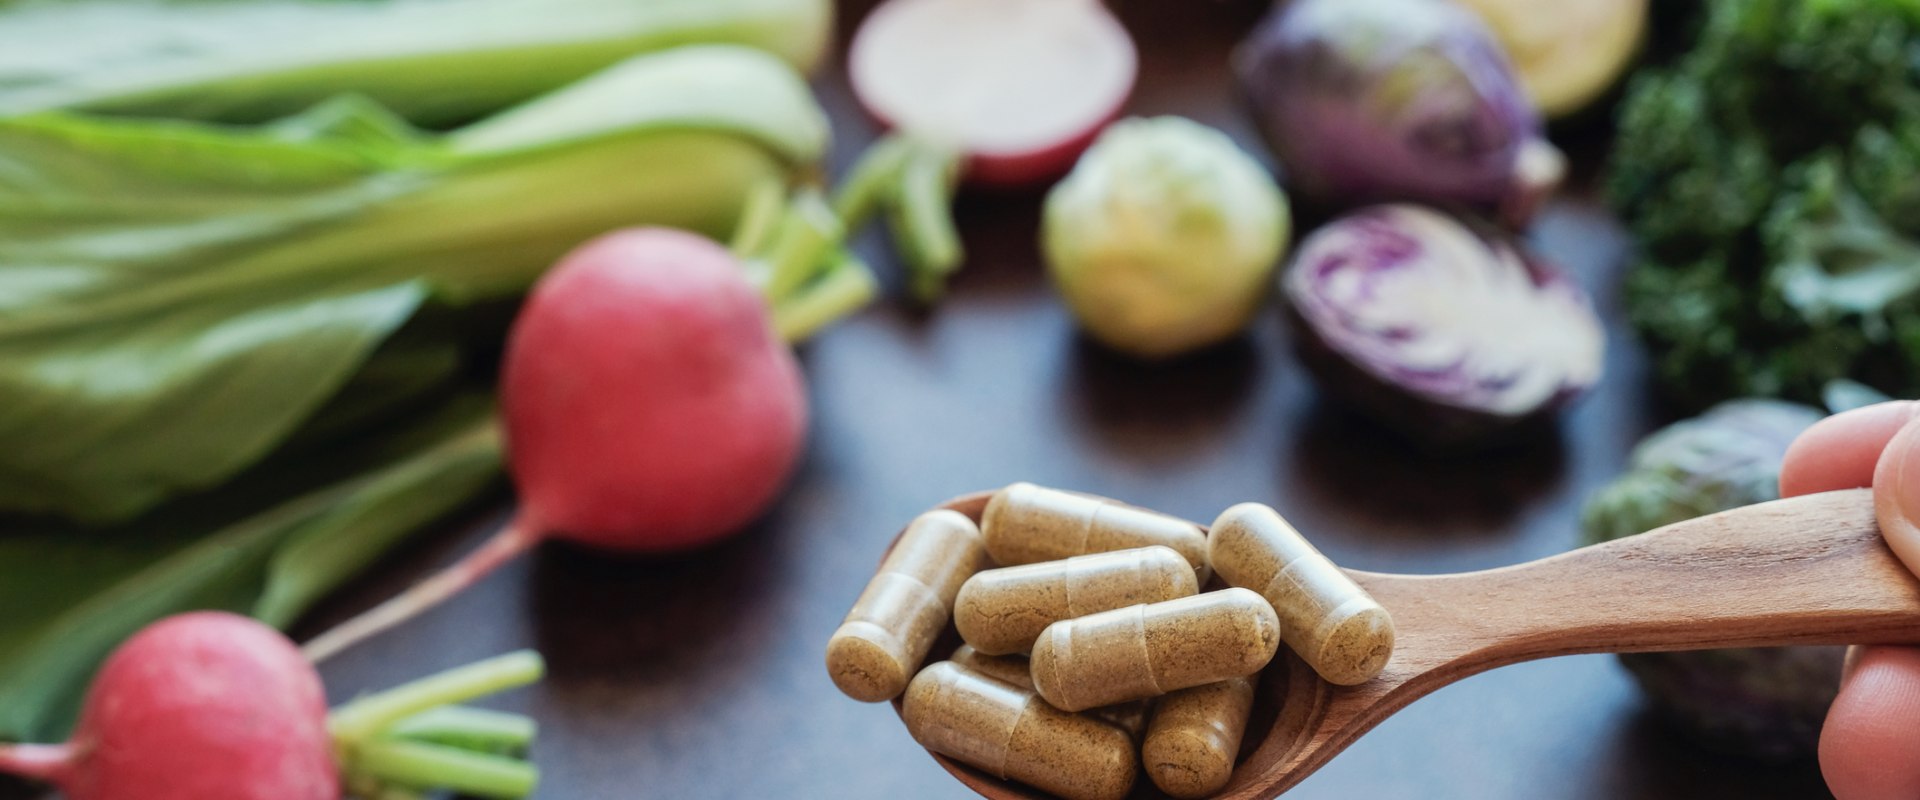 Can supplements be natural?